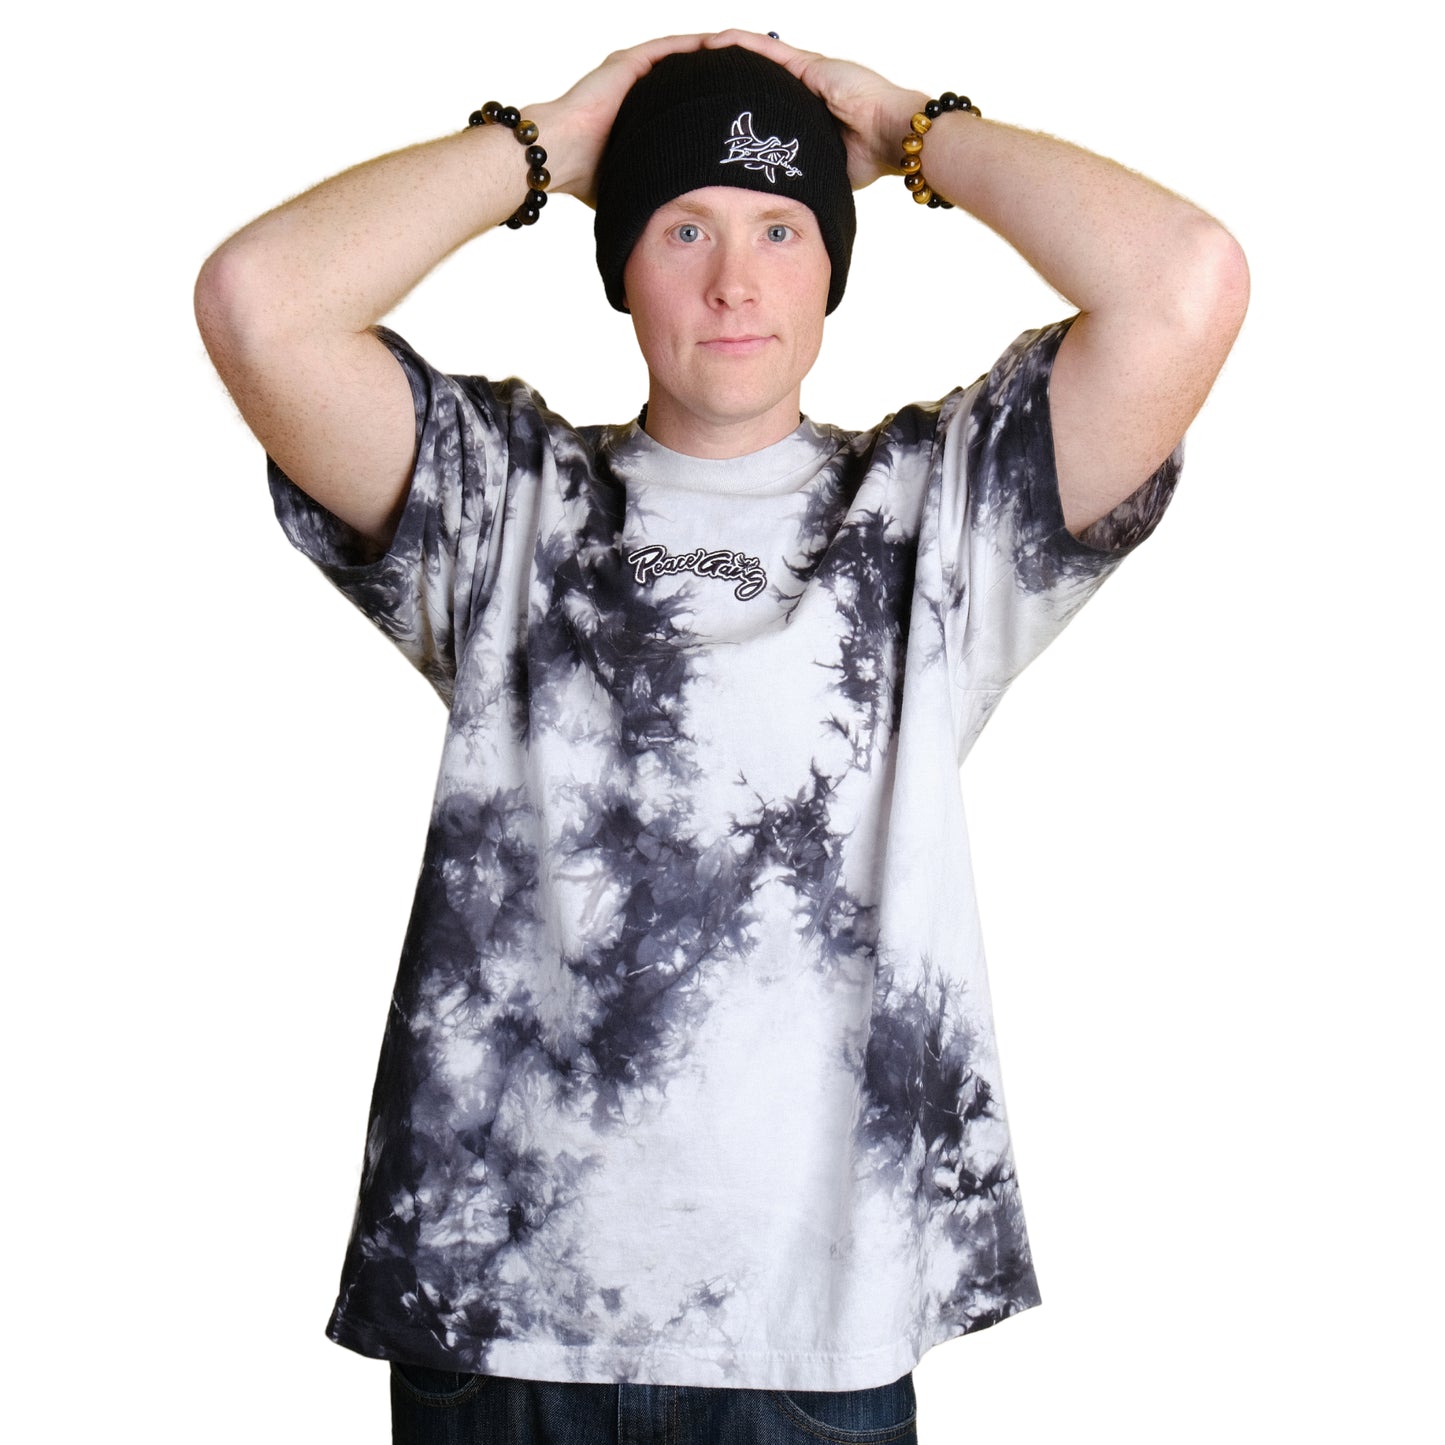 Embroidered Oversized tie-dye t-shirt - PEACE GANG Cursive